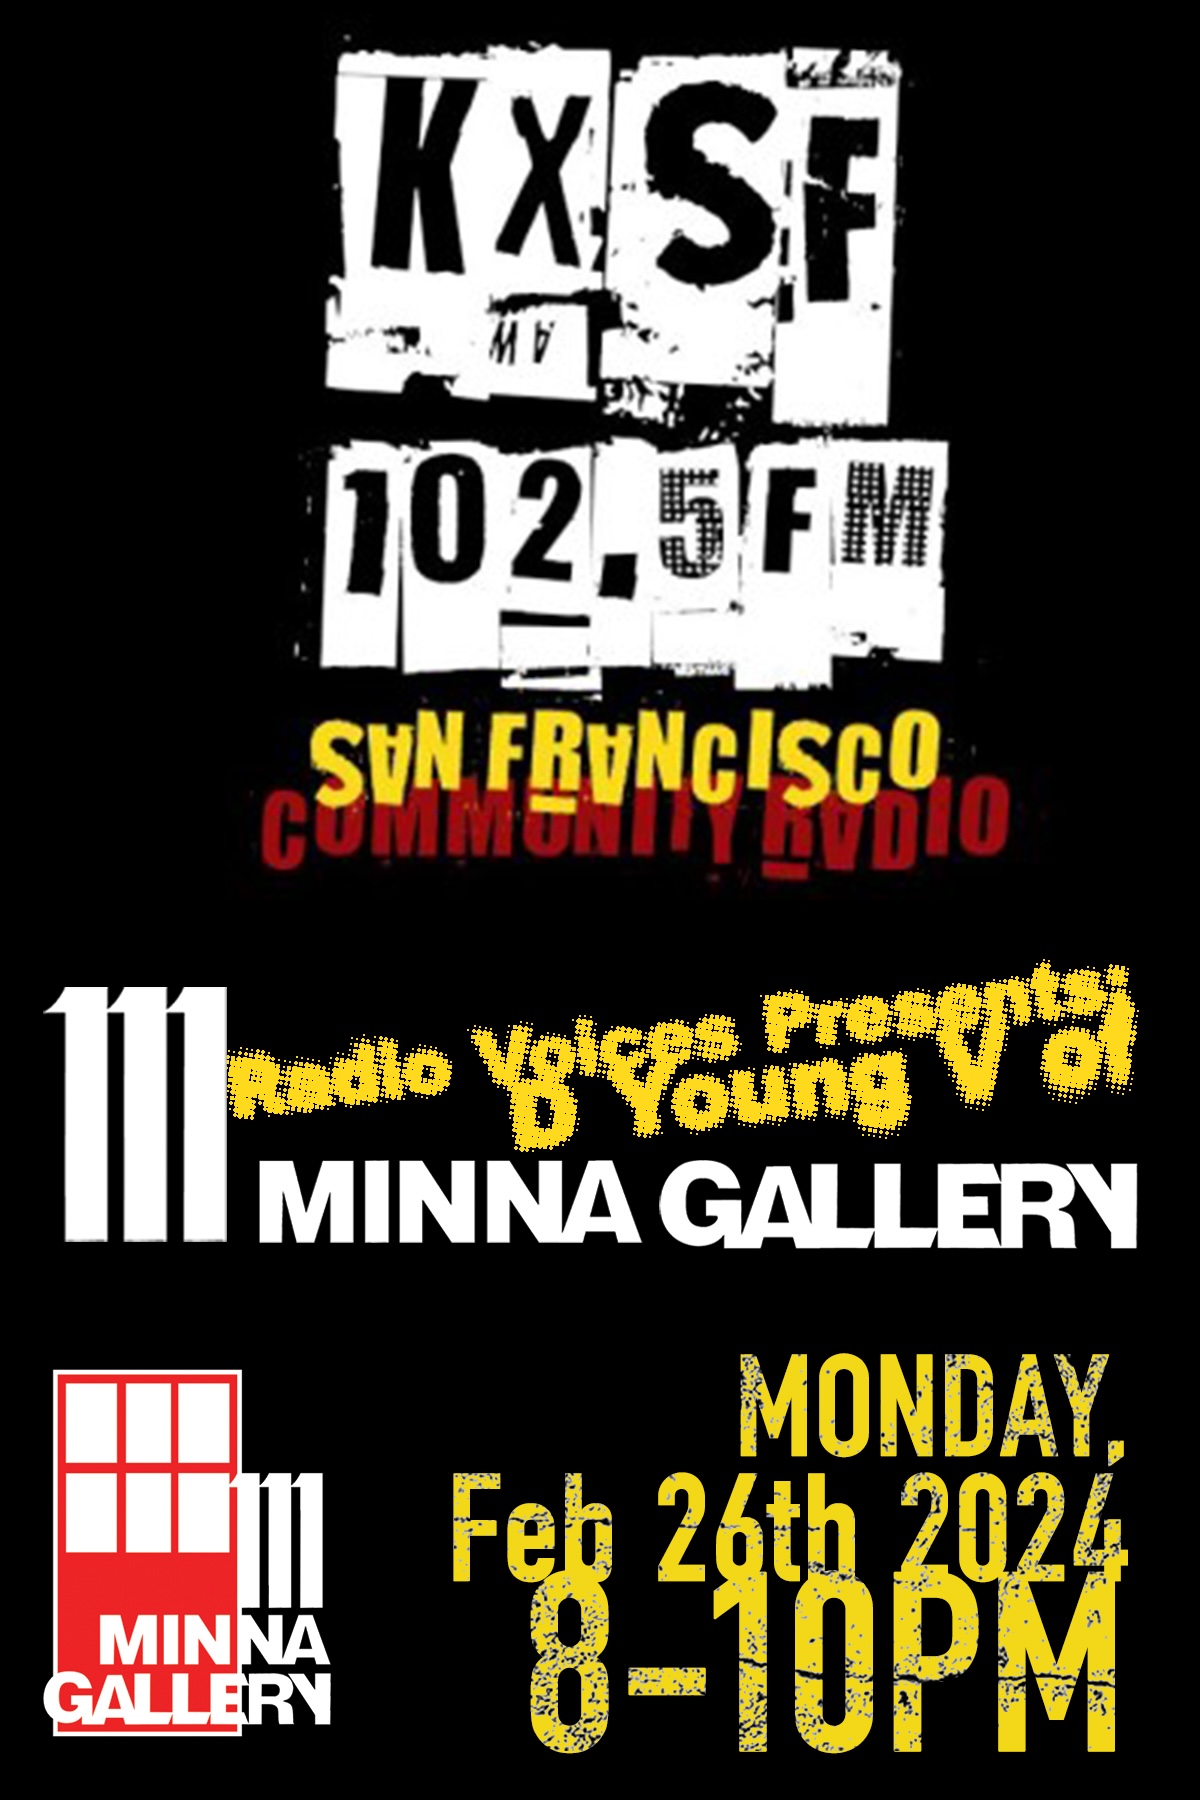 D Young V radio interview on KXSF